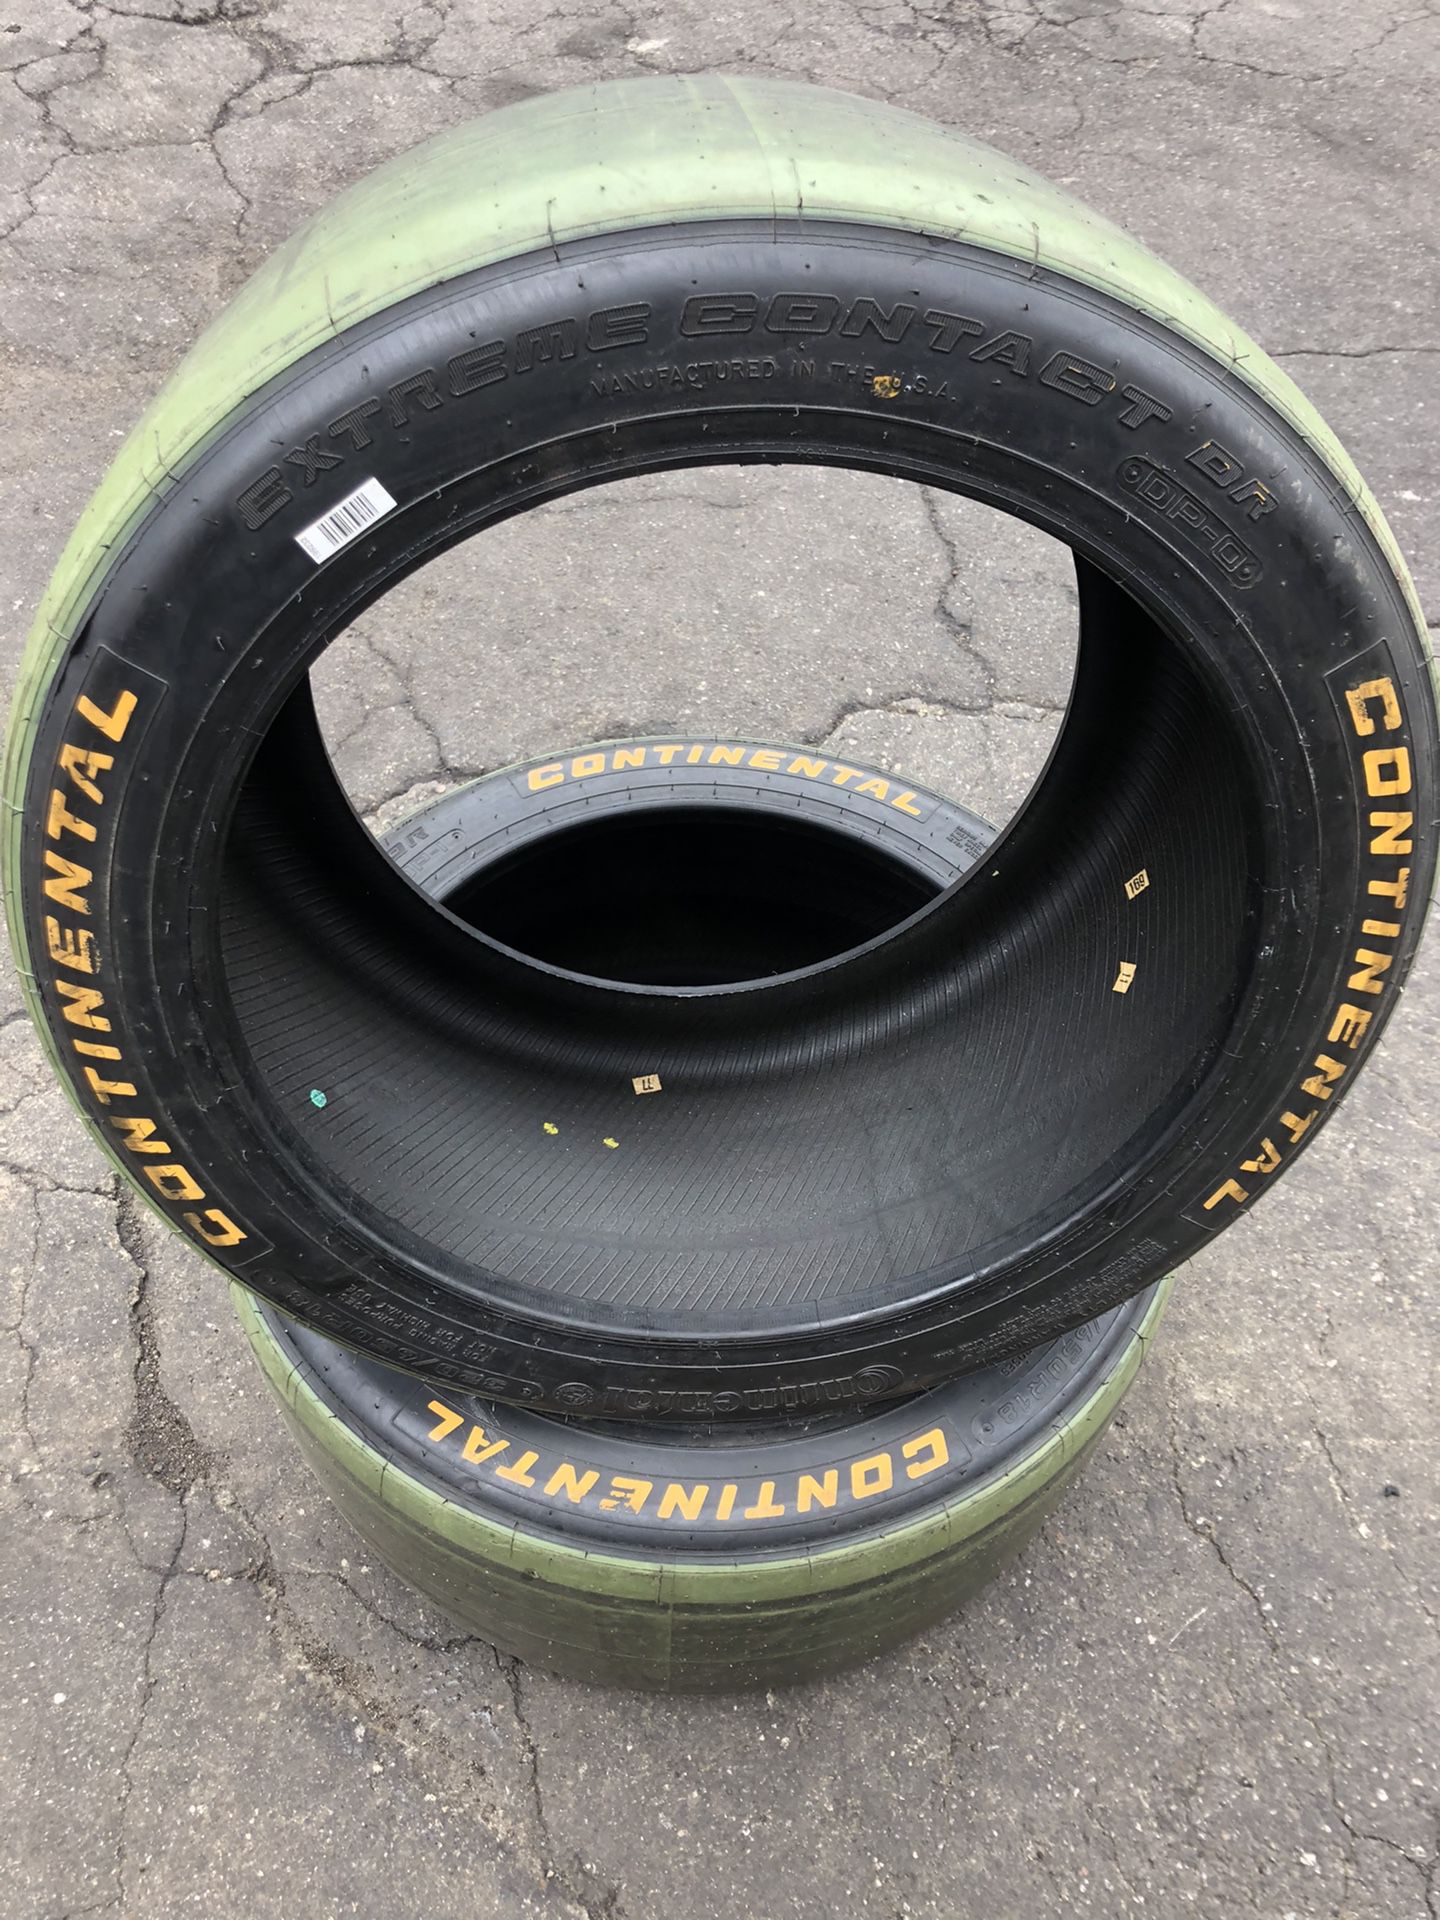 320/65/18 Continental Slicks race tires (2 for $200)